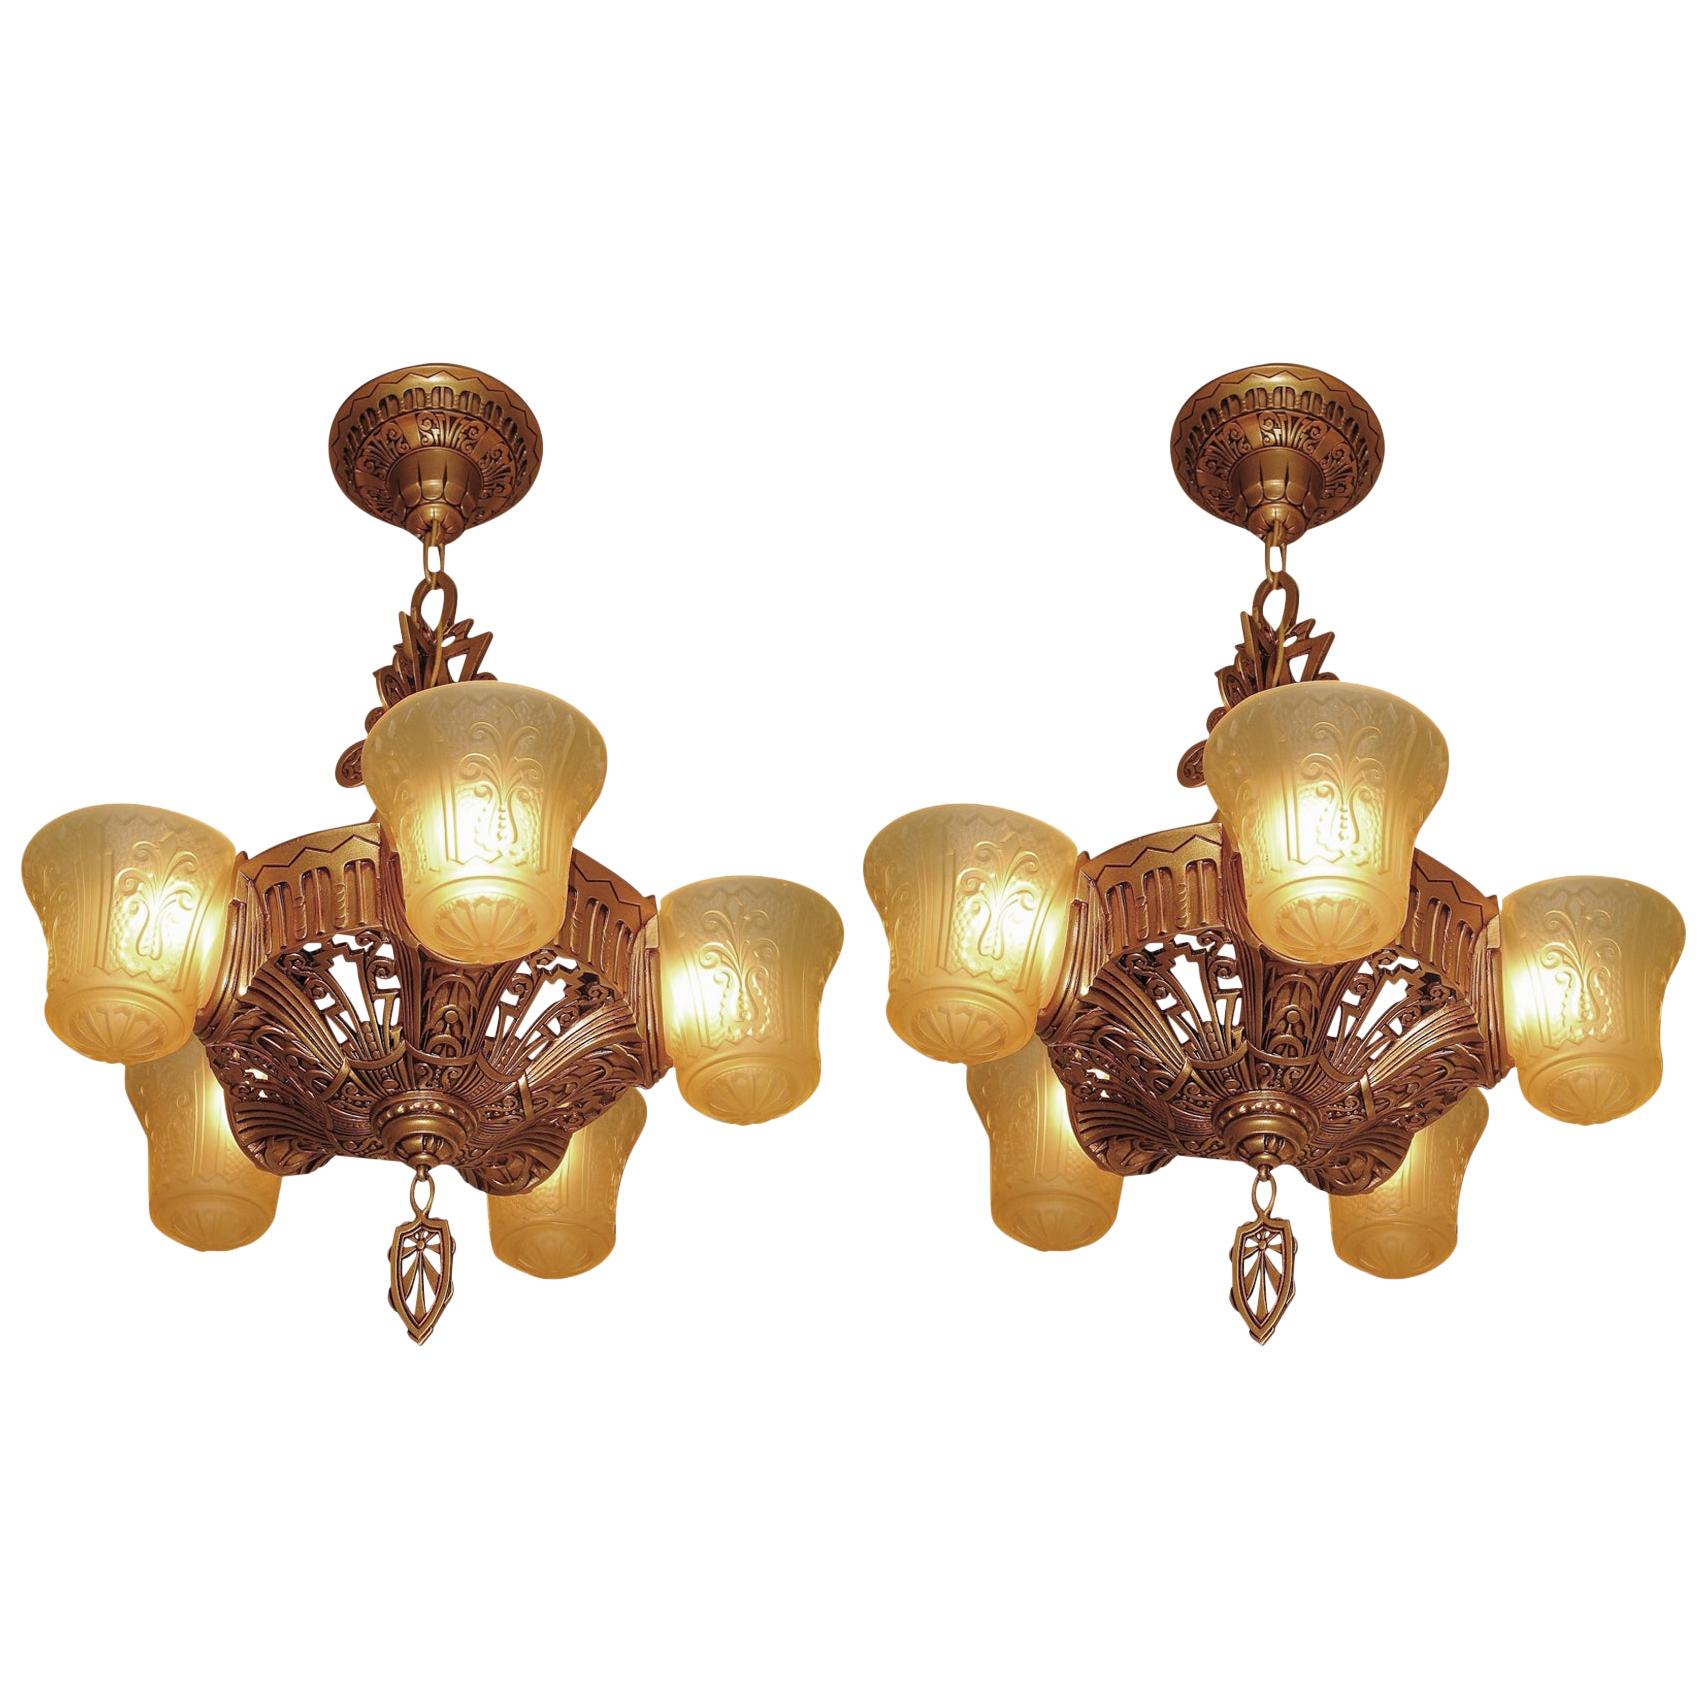 Beardslee Slip Shade Fixture Antique Golden with Amber Shades For Sale